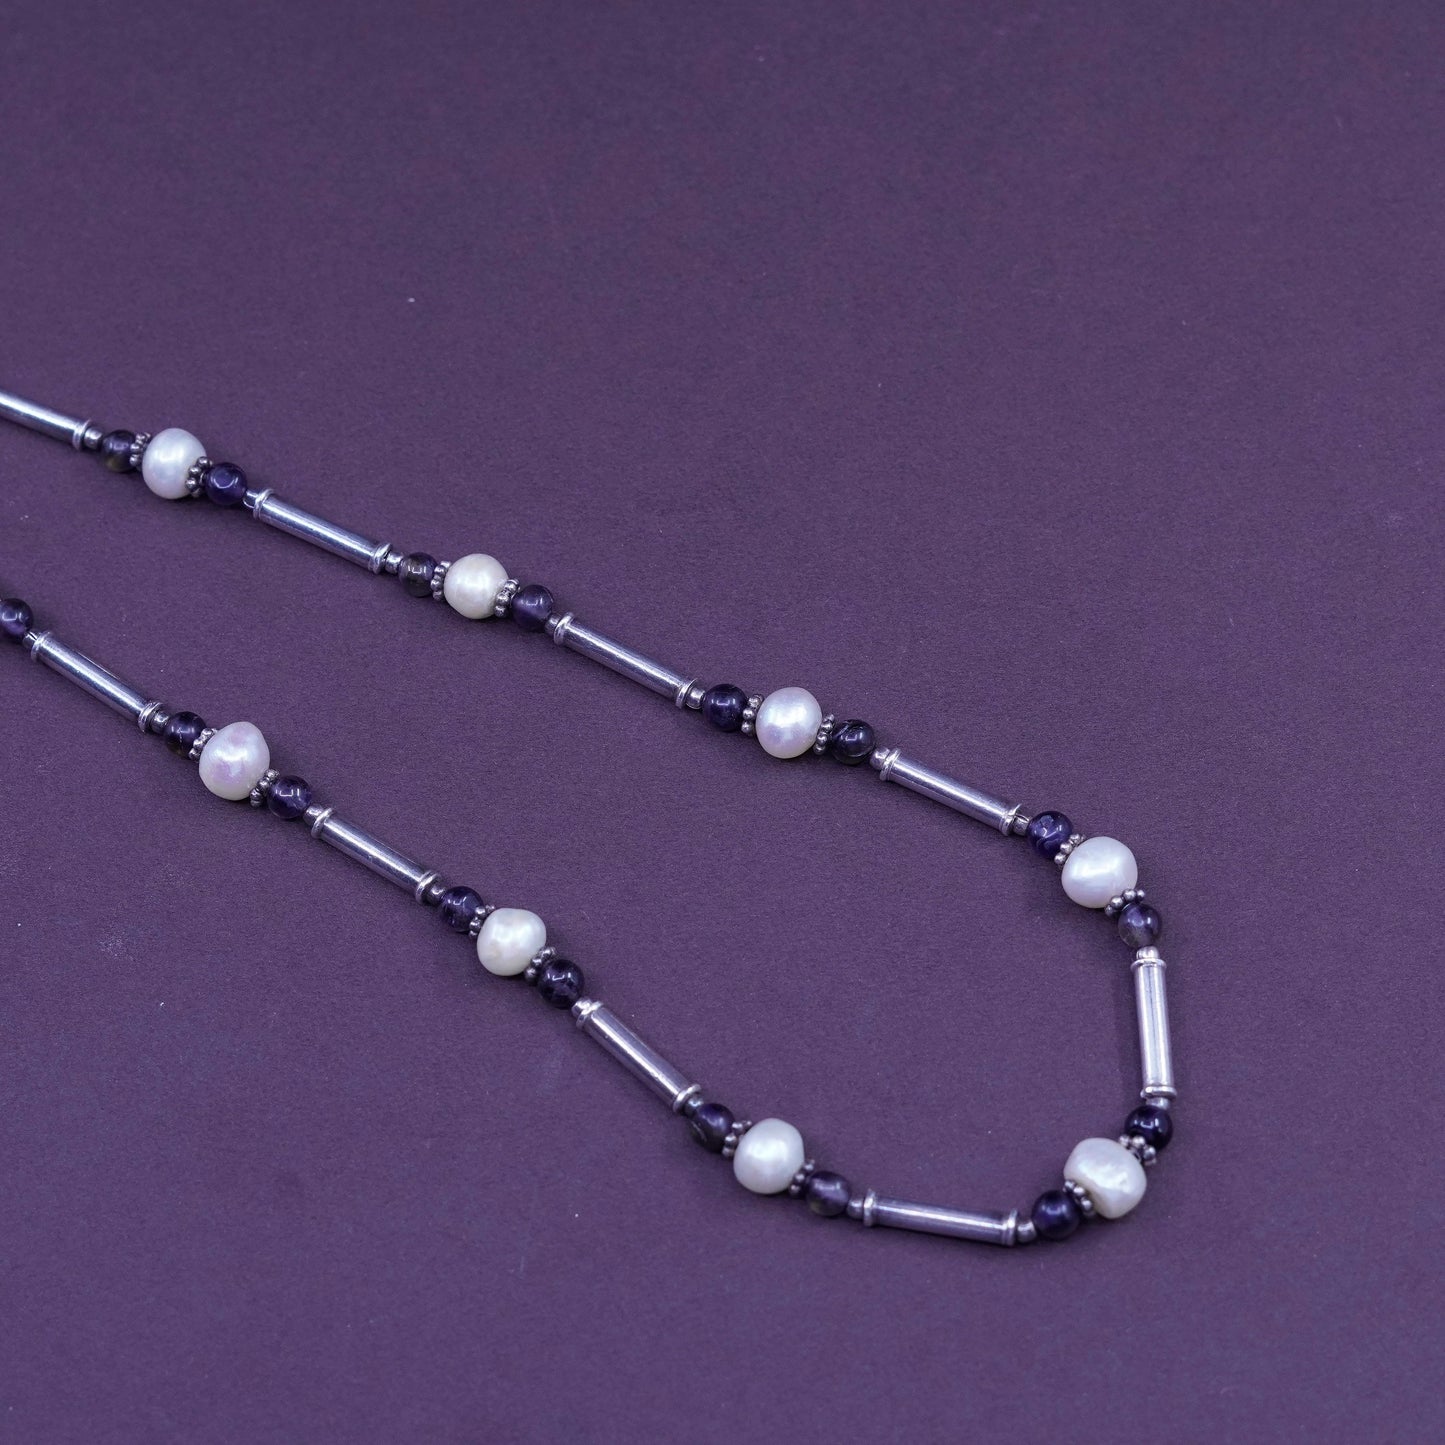 16”, vintage sterling 925 silver handmade bar chain necklace w/ pearl amethyst